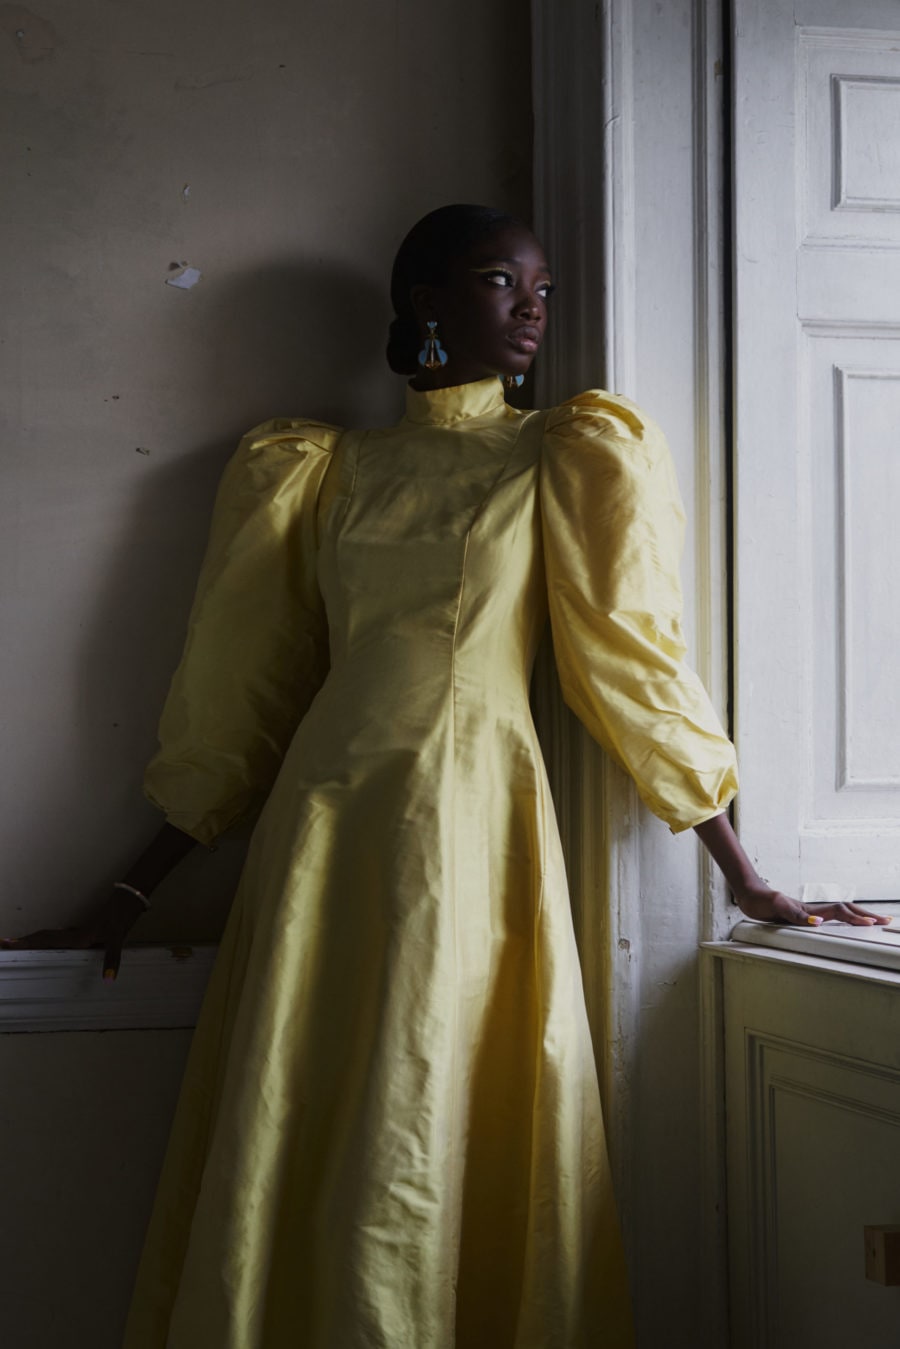 Deborah Latouche's vibrant demi-couture occasion wear puts style, sustainability and modest dressing at equal billing.